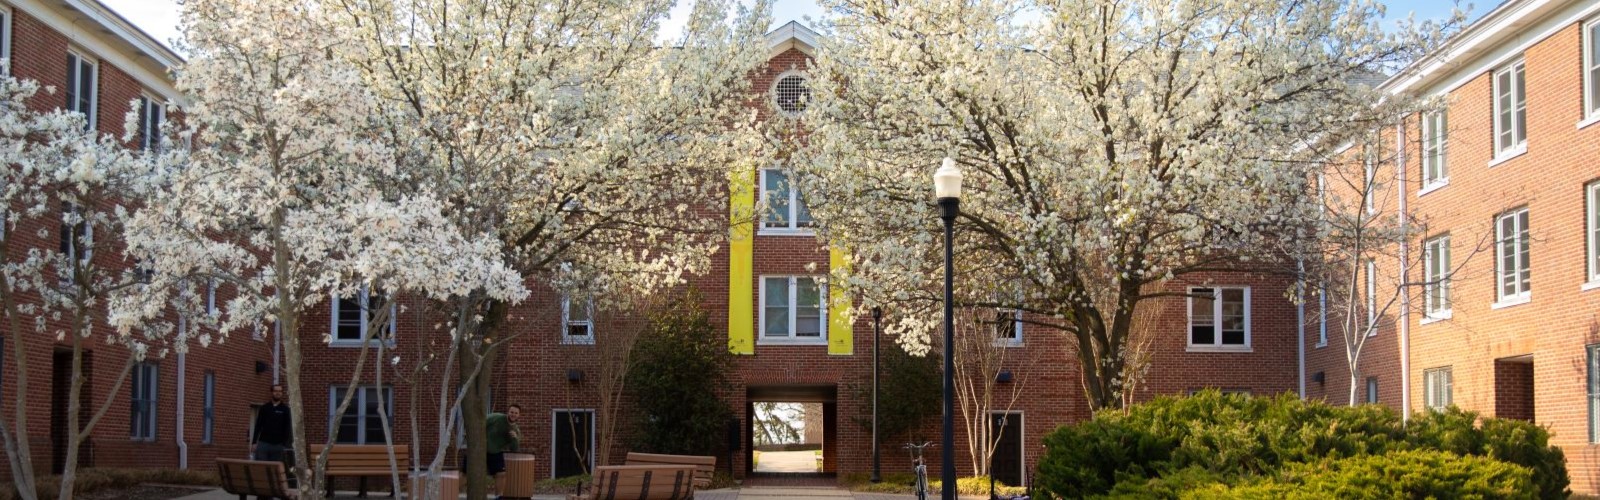 Magnolia Hall during the fall with blooming trees.